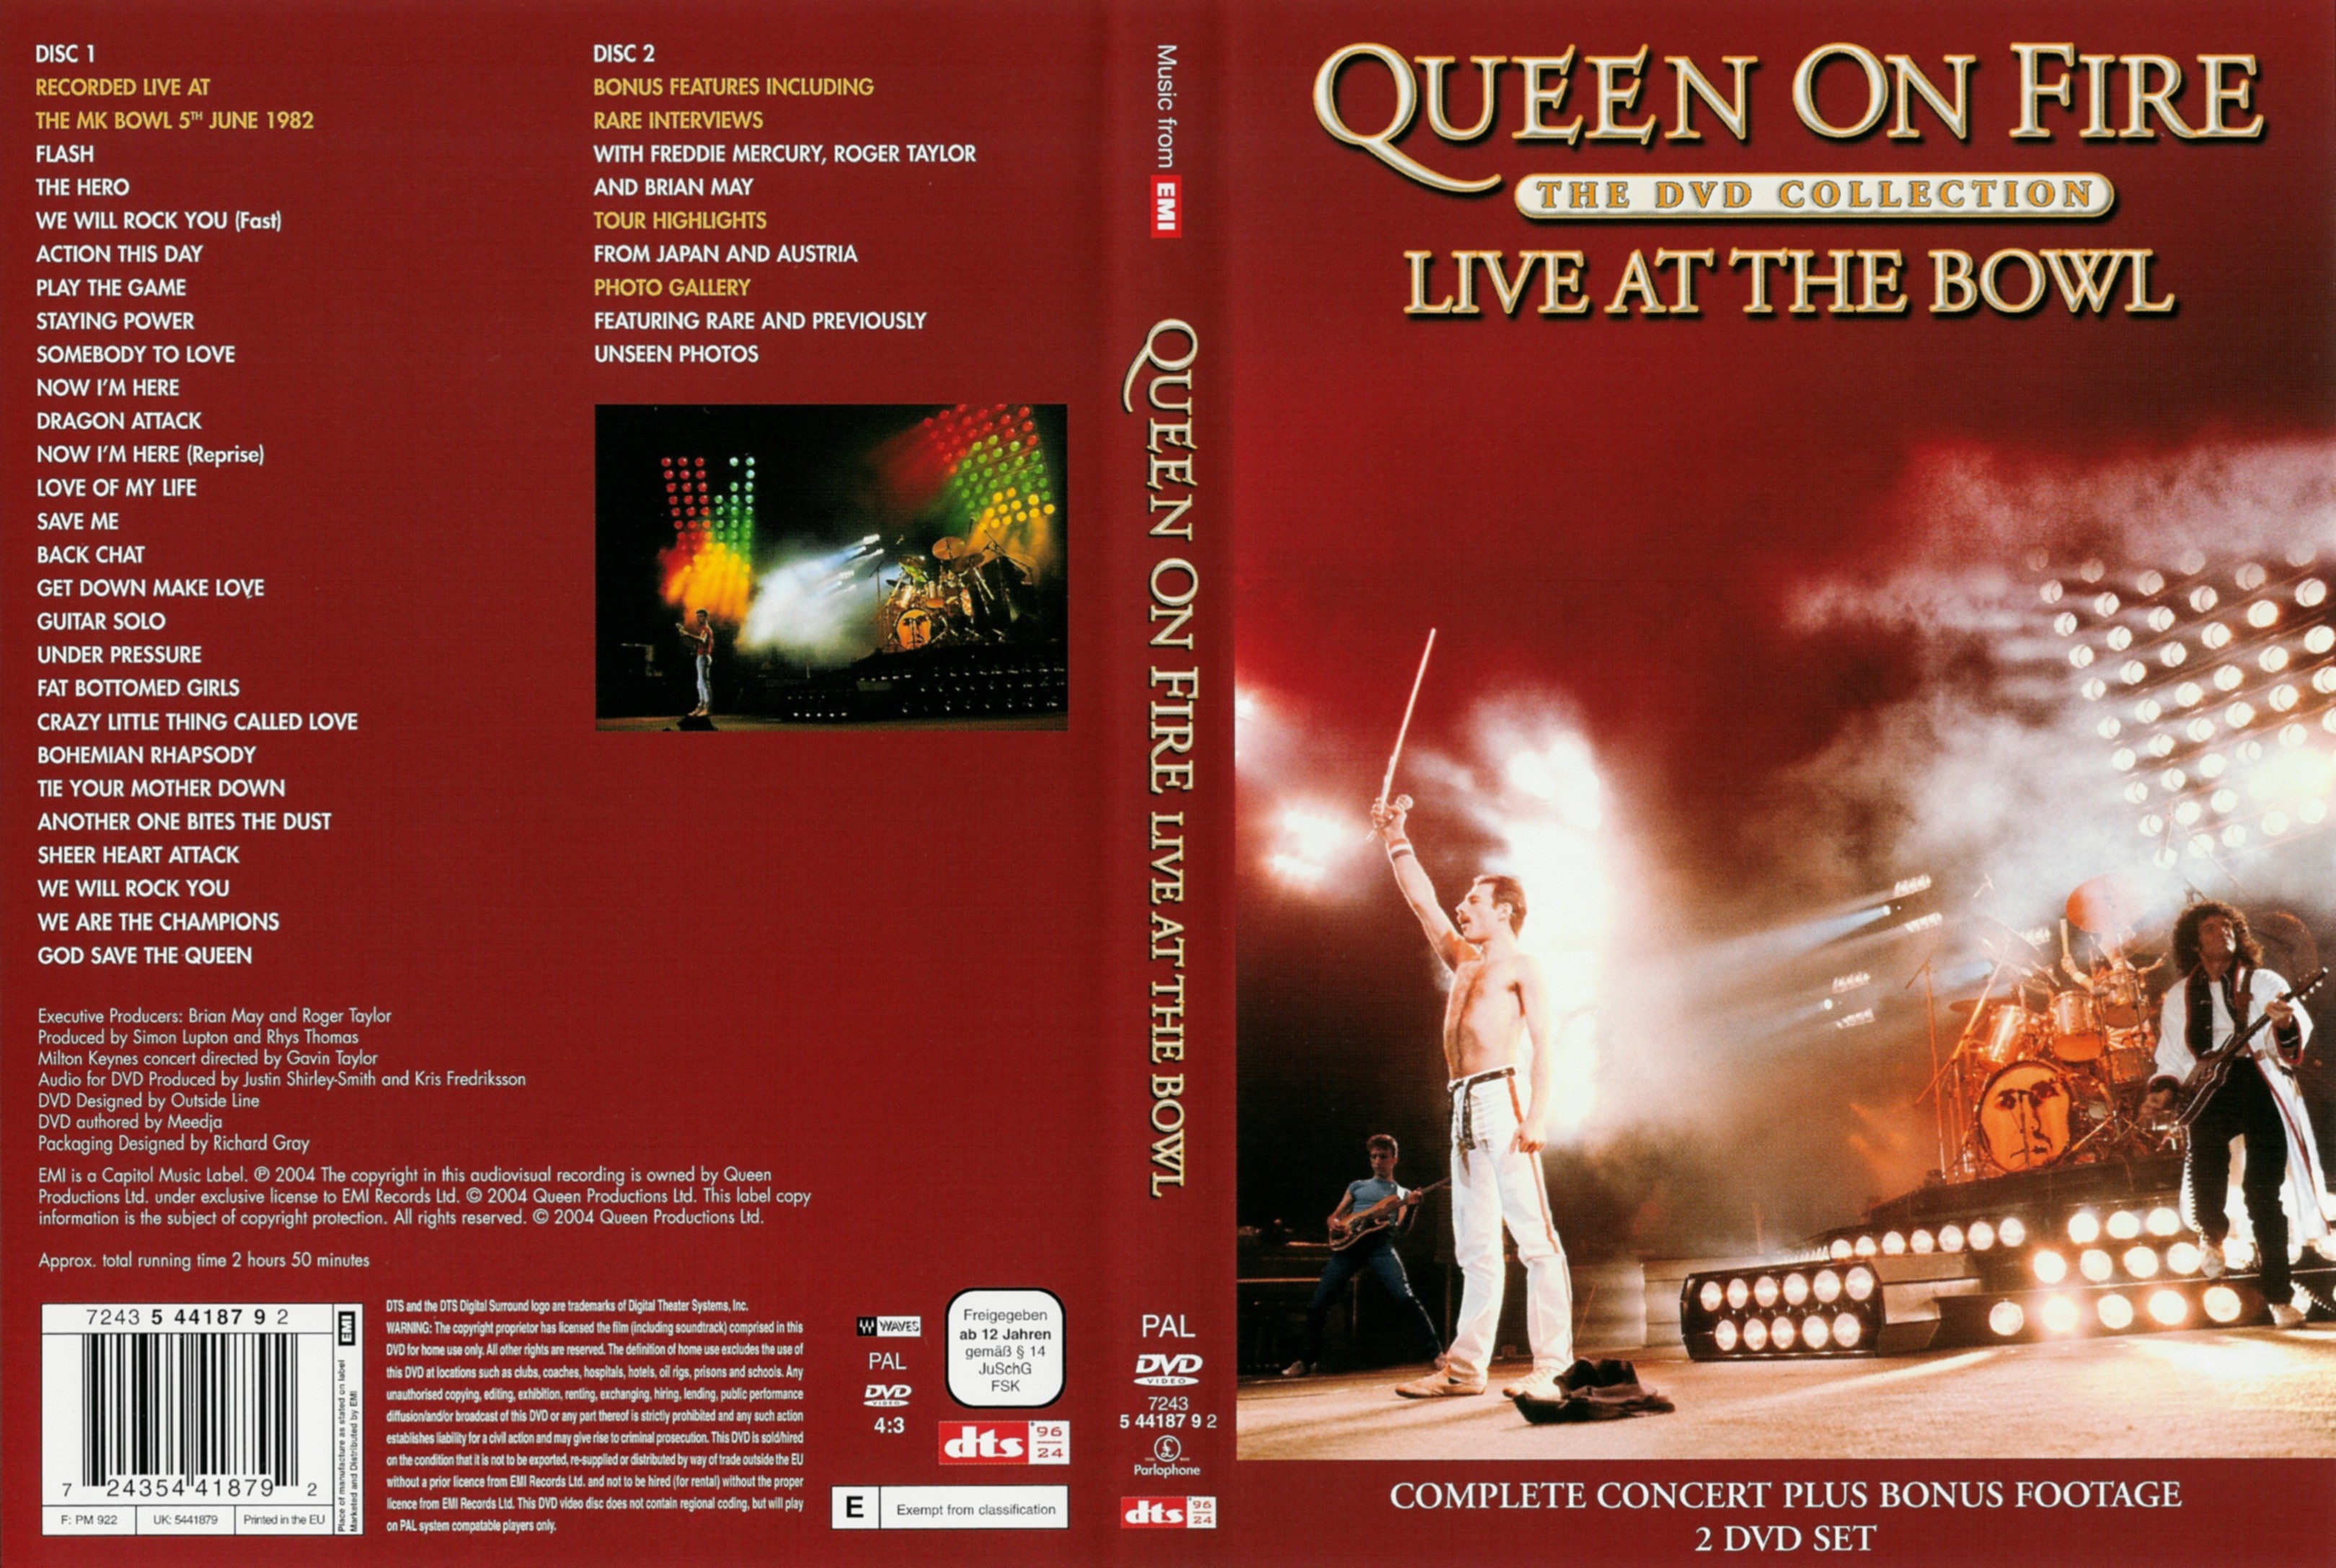 Jaquette DVD Queen Live at the bowl